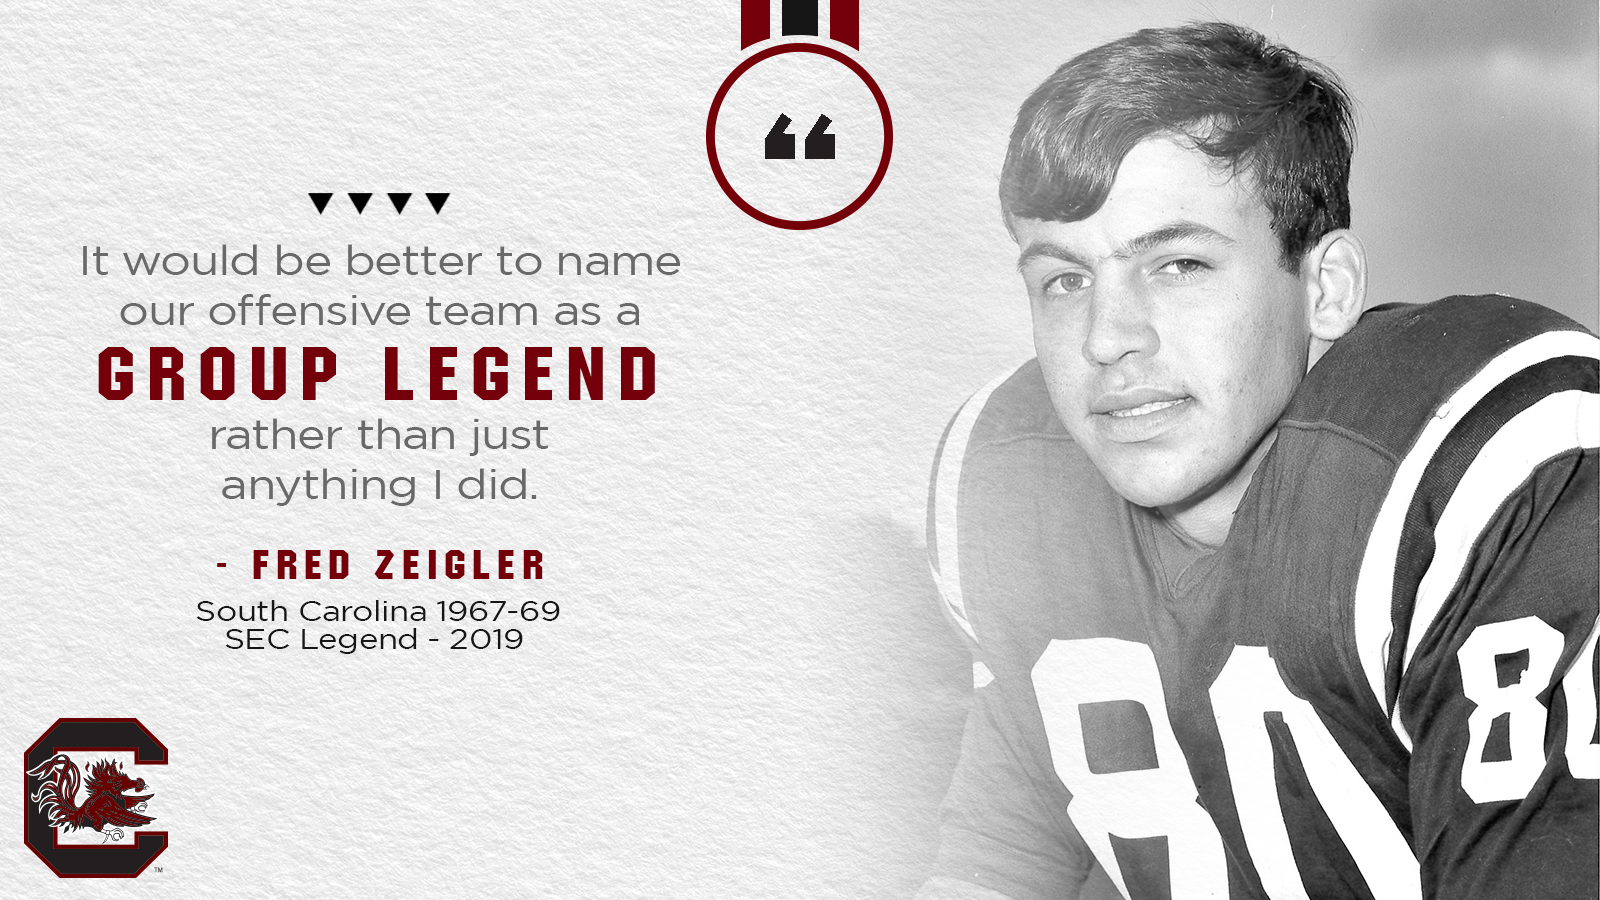 Fred Zeigler Goes from Walk-On to Legend